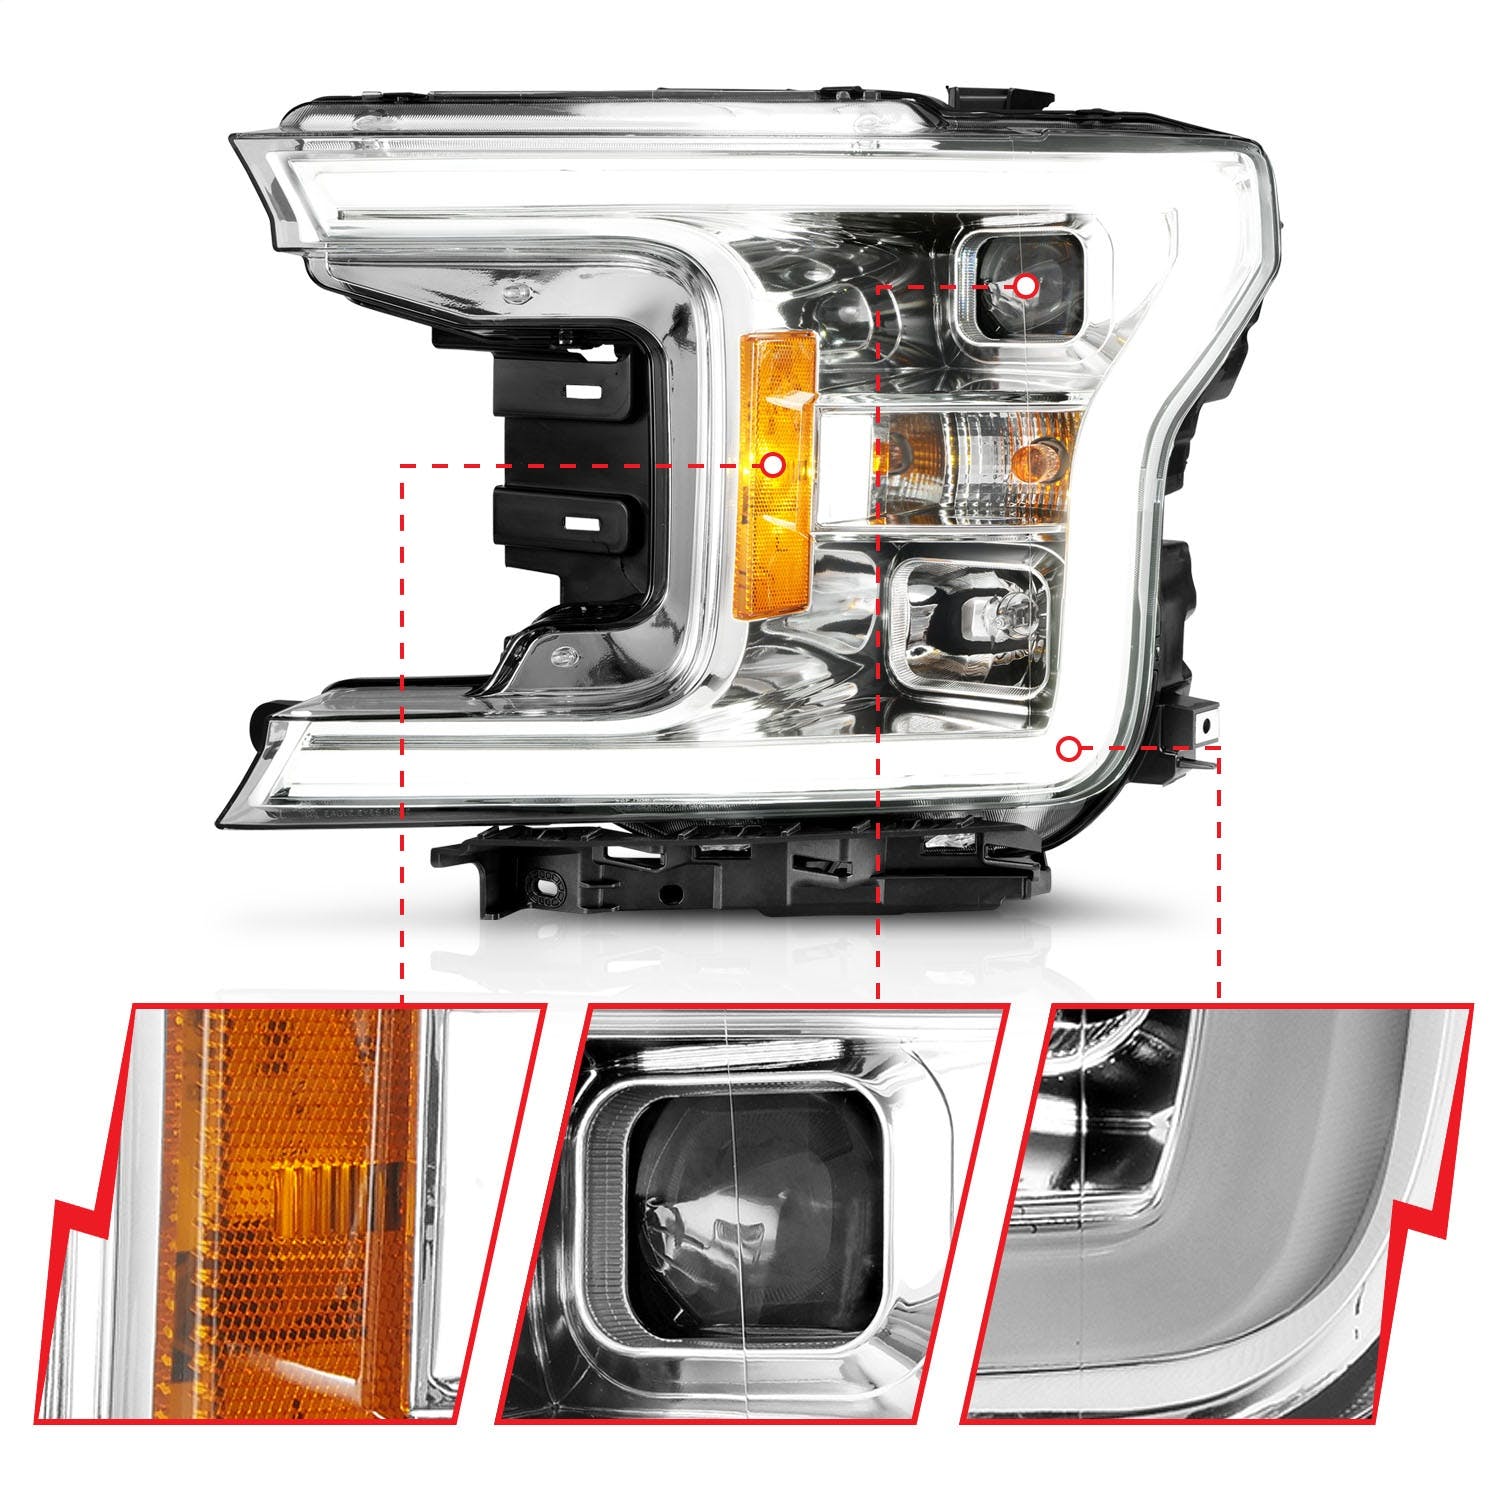 AnzoUSA 111399 Projector Headlights with Plank Style Switchback Chrome with Amber